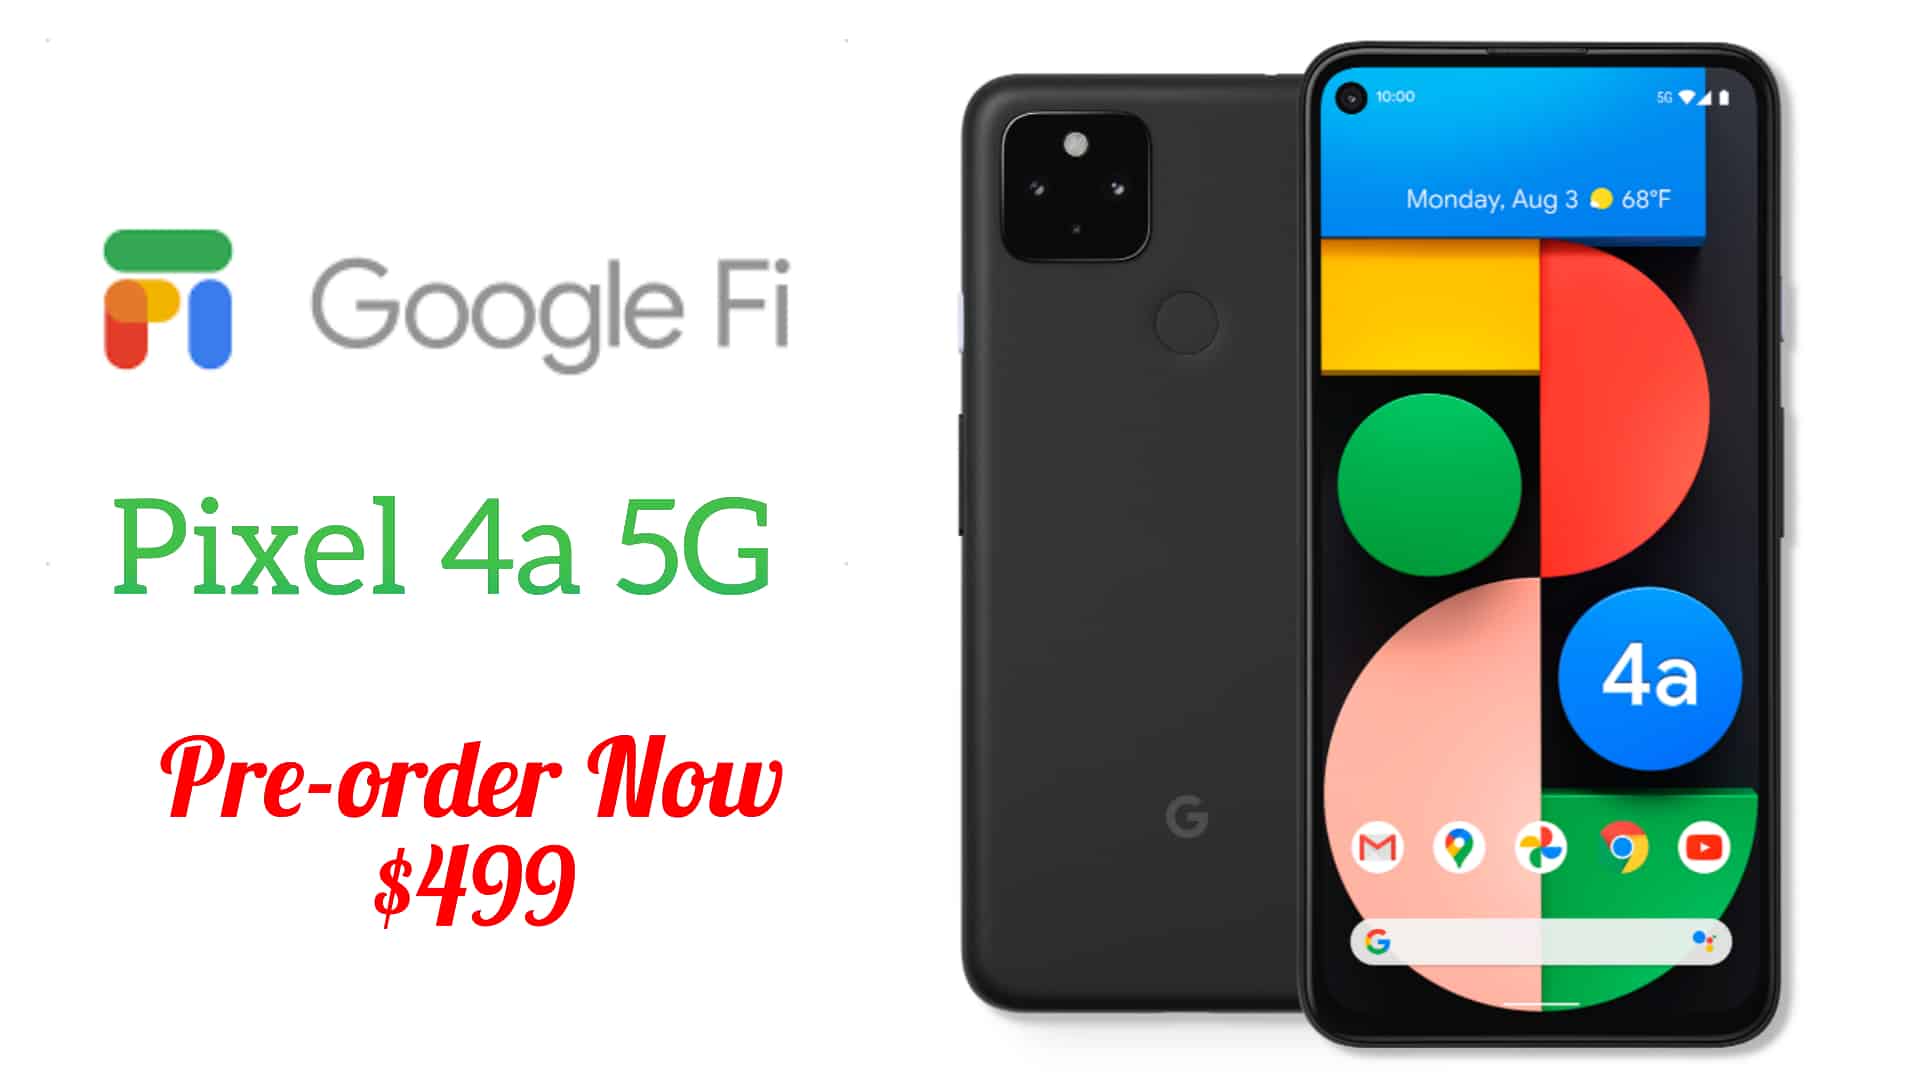 Pixel 4a With 5G Is Now Available for Pre-Order on Google Fi Website